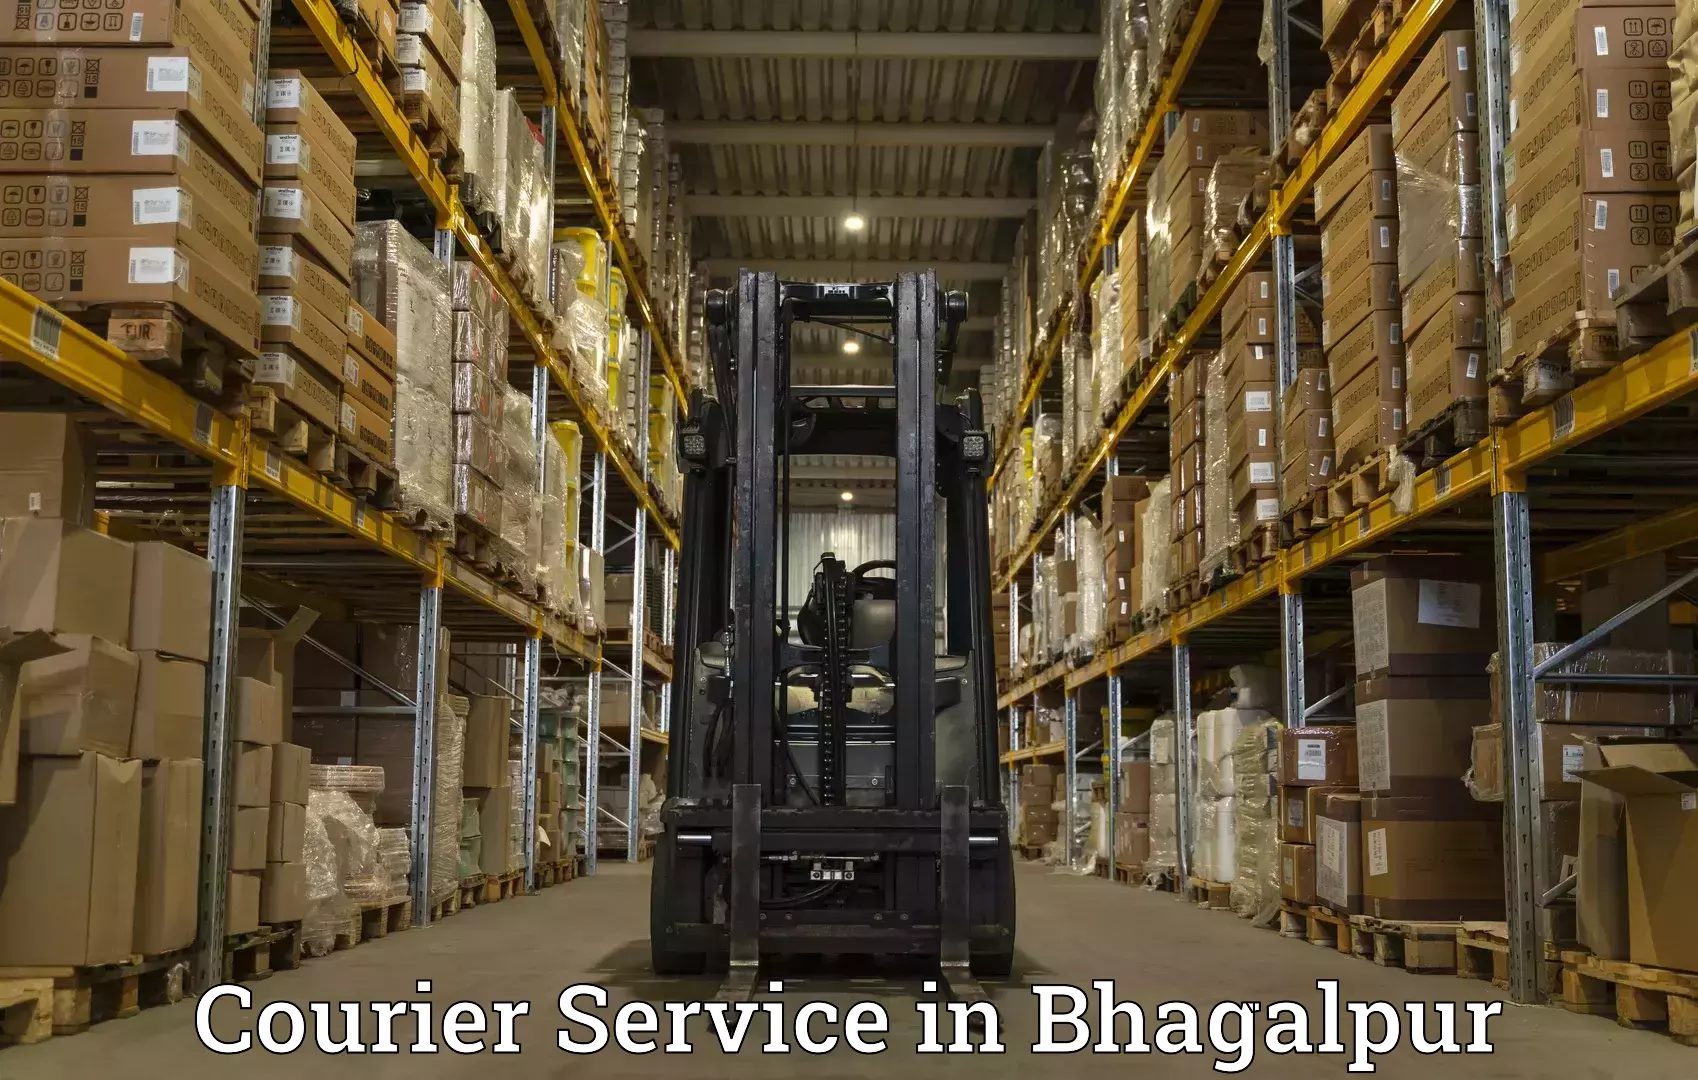 On-demand shipping options in Bhagalpur